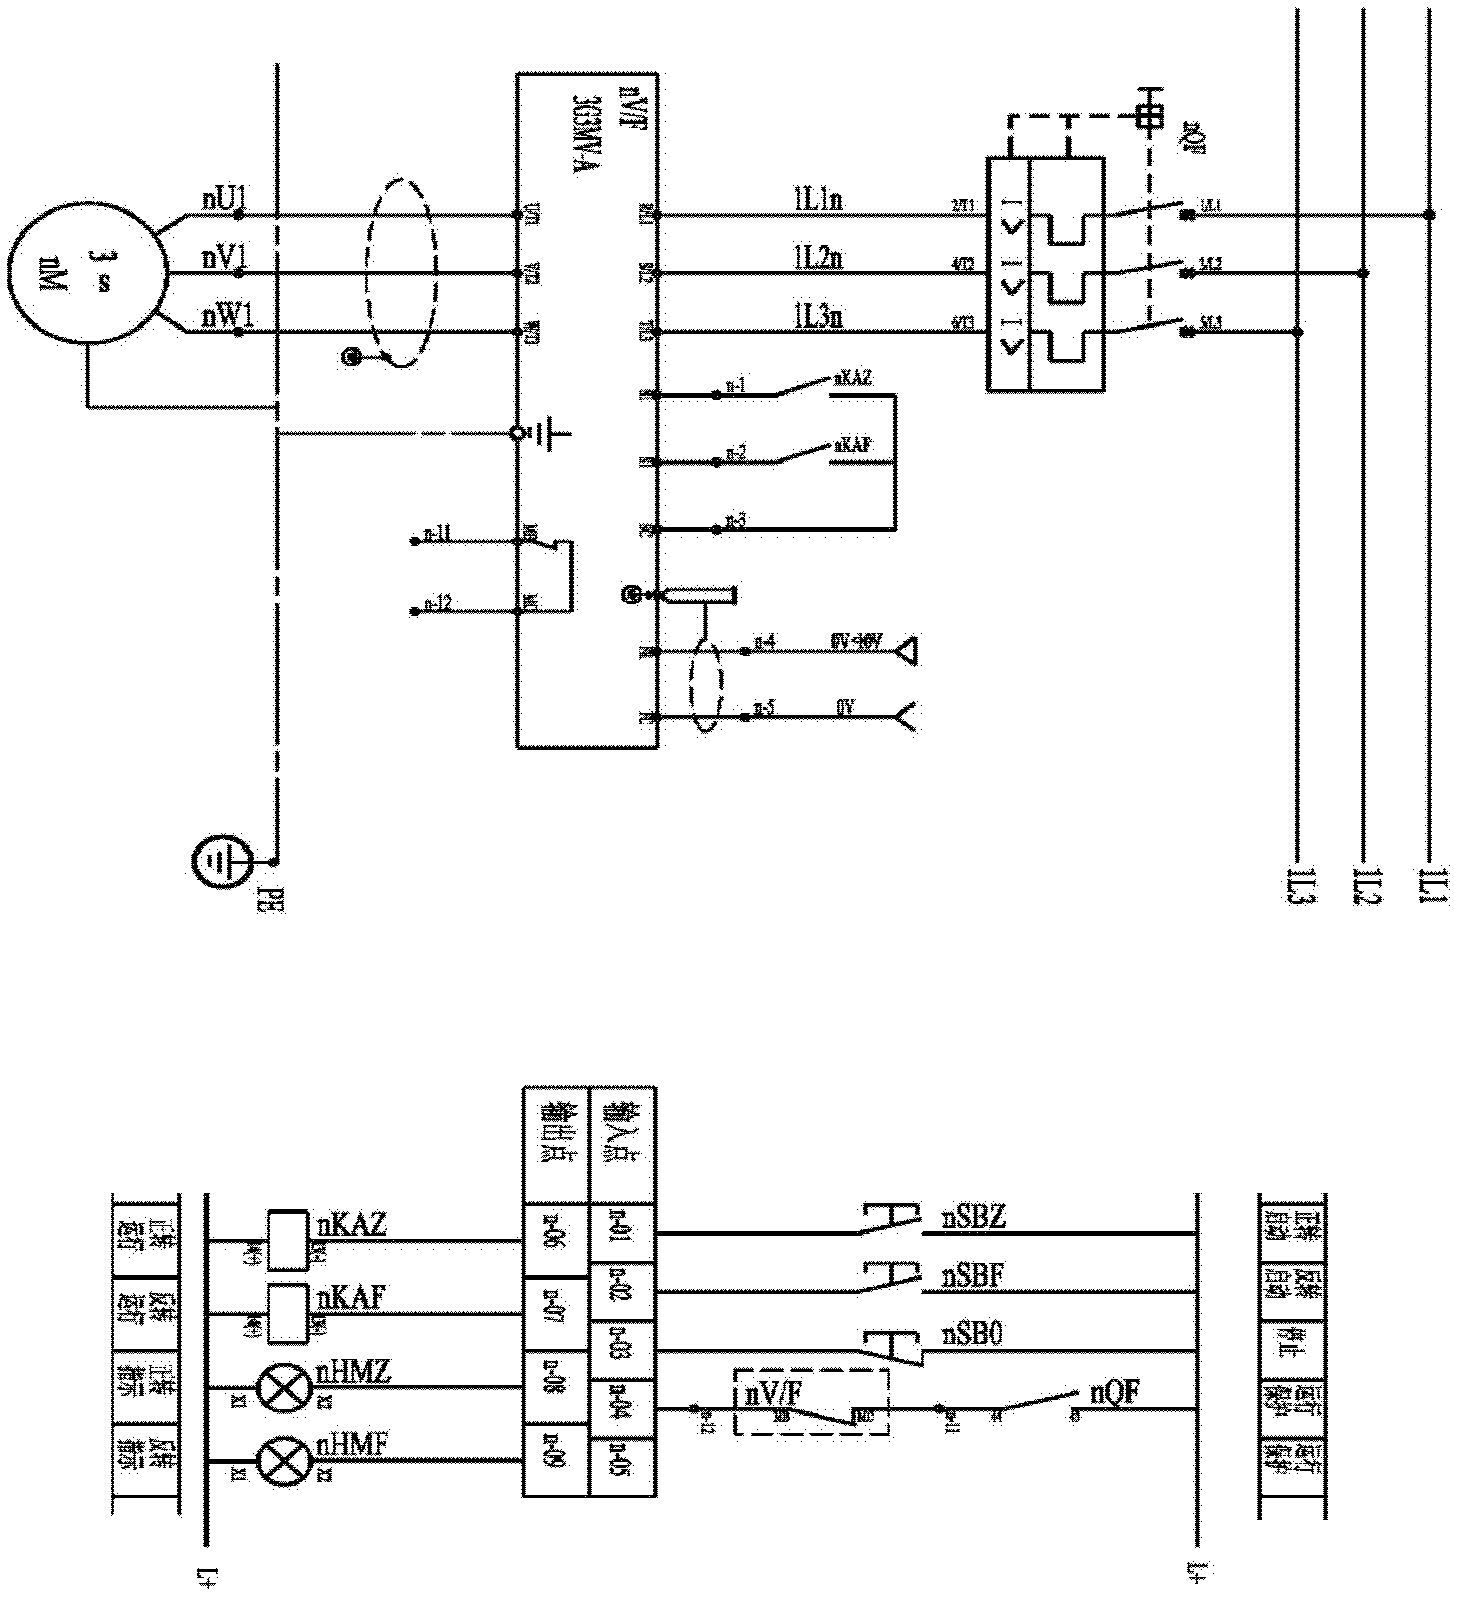 Process and device for producing artificial boards by aid of spreading machine with multiple multilayer presses